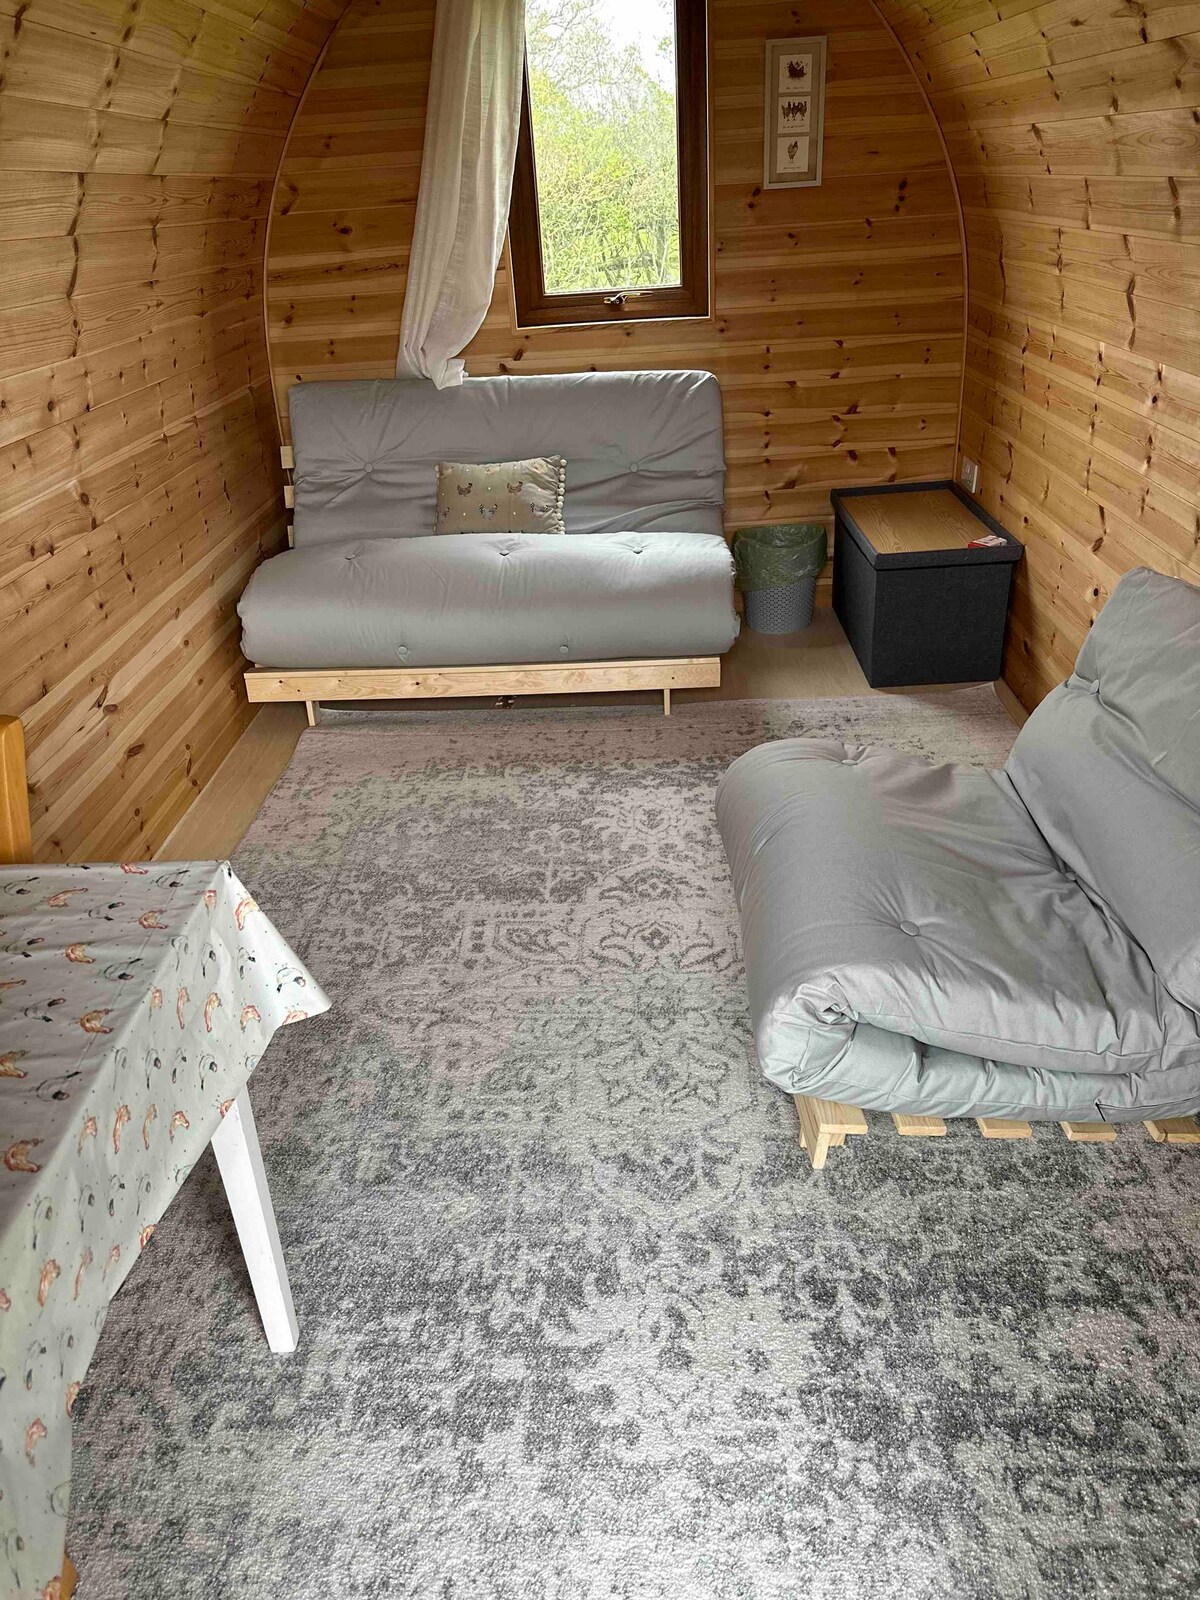 The Roost - Tanglin Farm Camping Pod